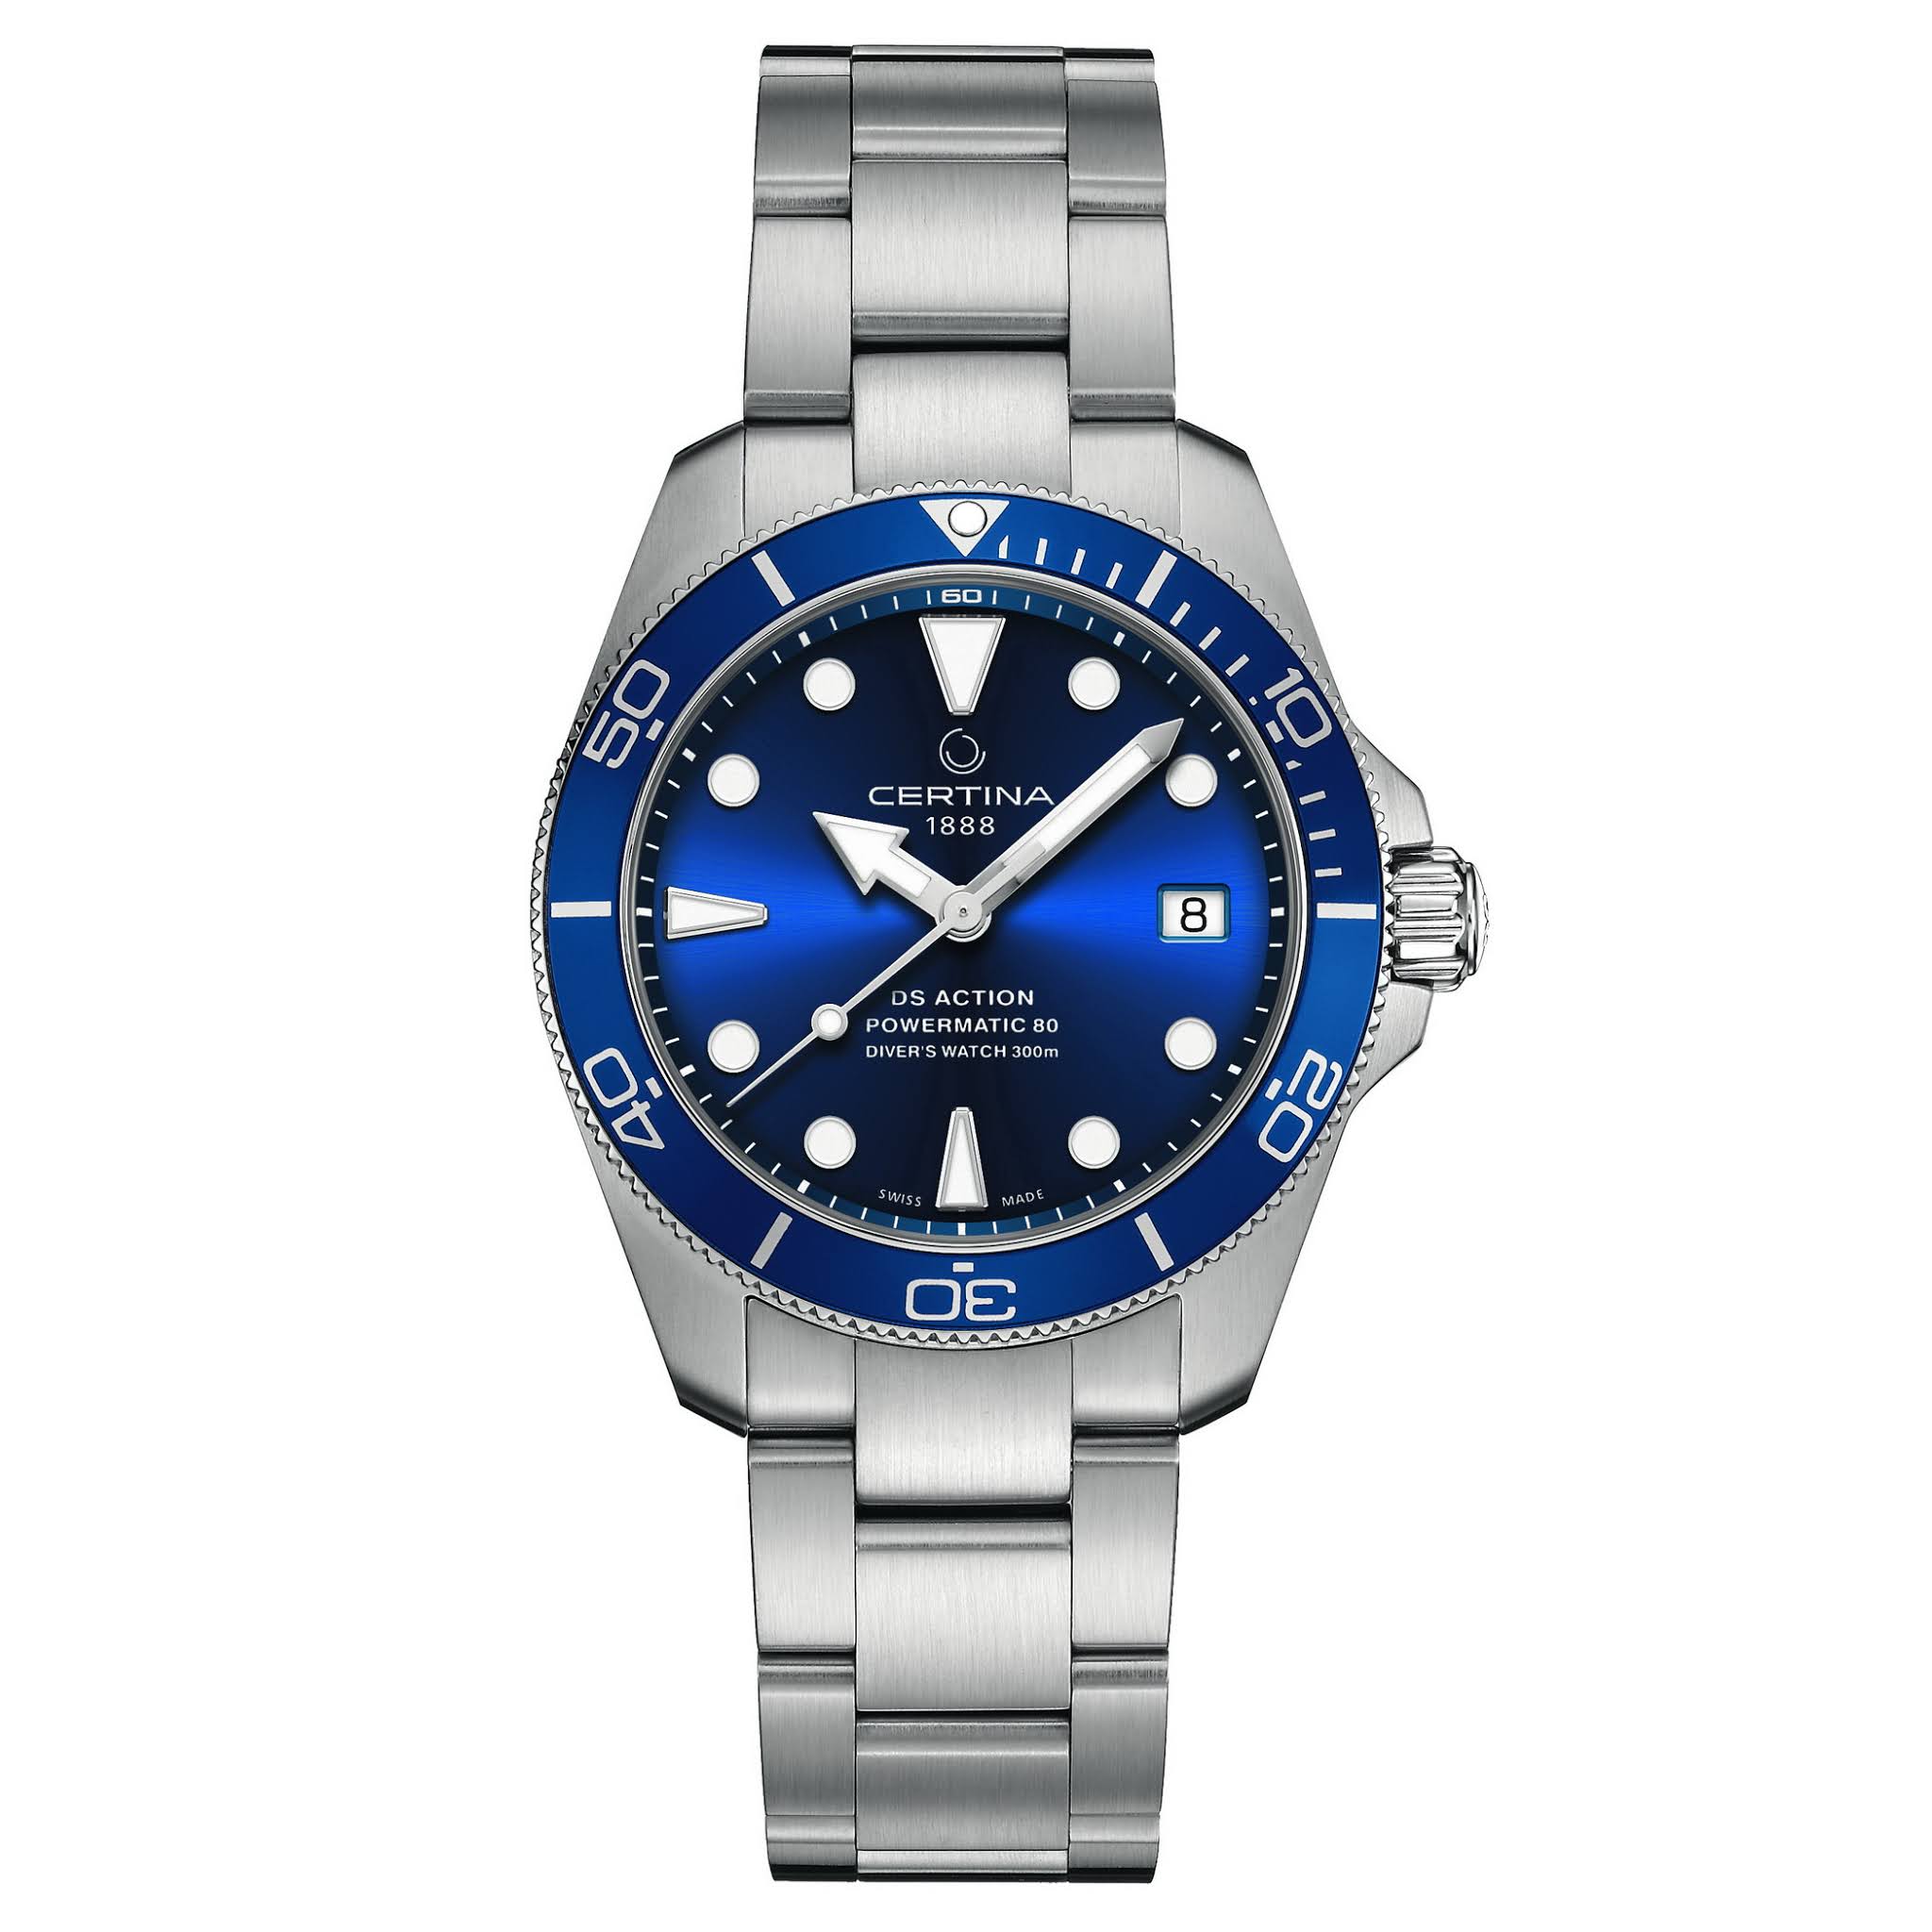 Certina's new DS Action Diver 38mm CERTINA%2BDS%2BAction%2BDiver%2B38mm%2B05